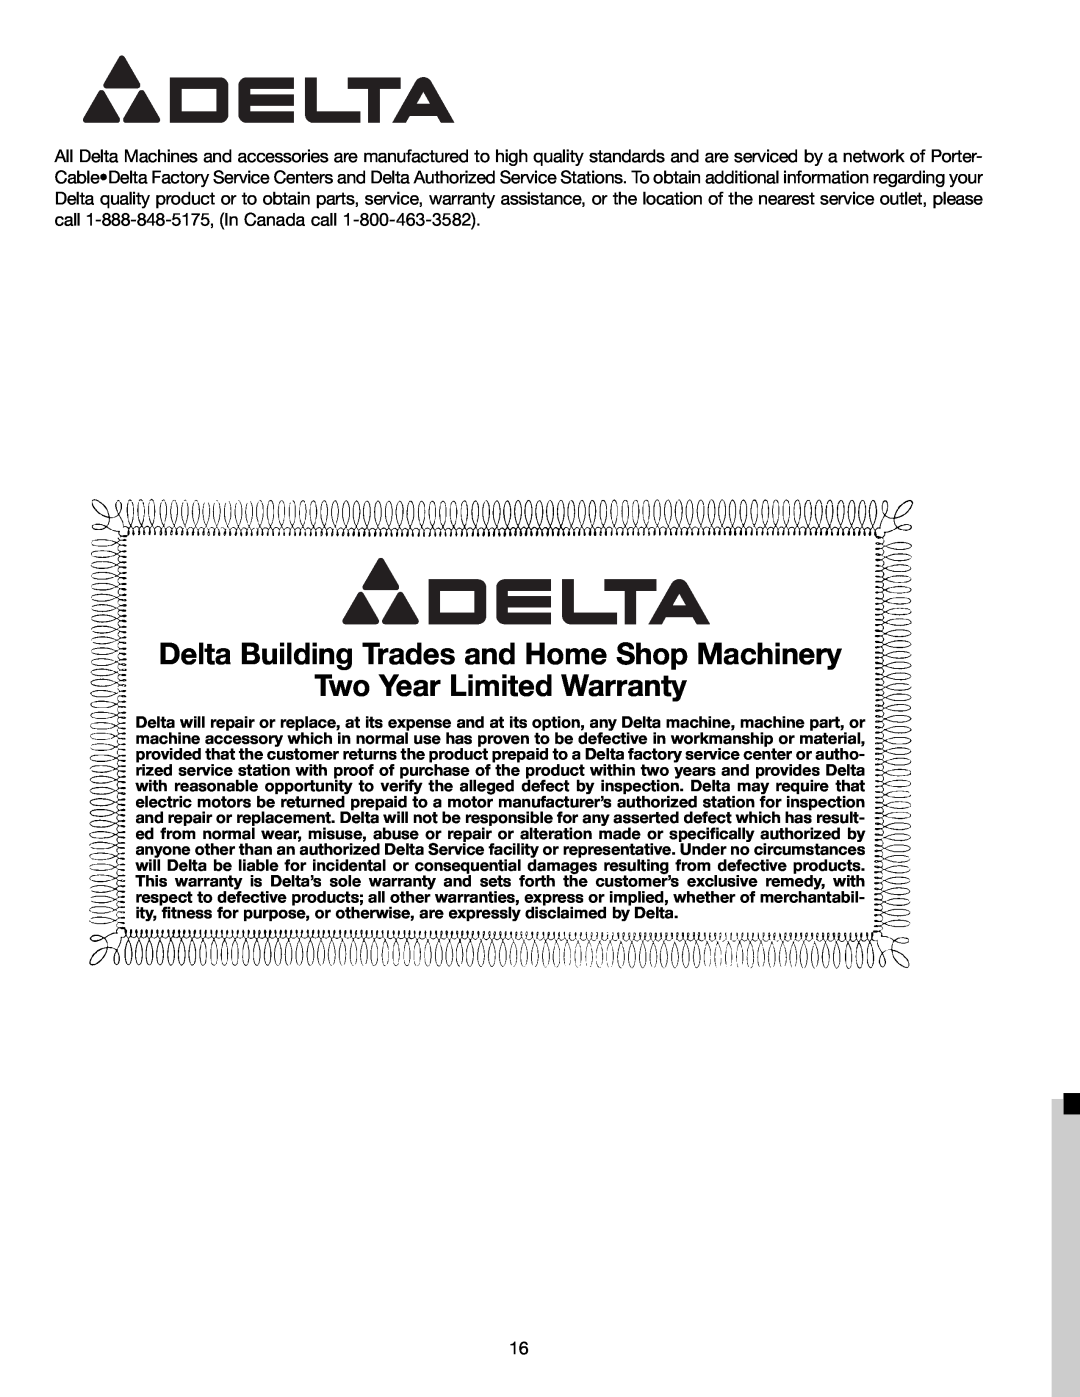 Delta 40-540 warranty Delta Building Trades and Home Shop Machinery, Two Year Limited Warranty 